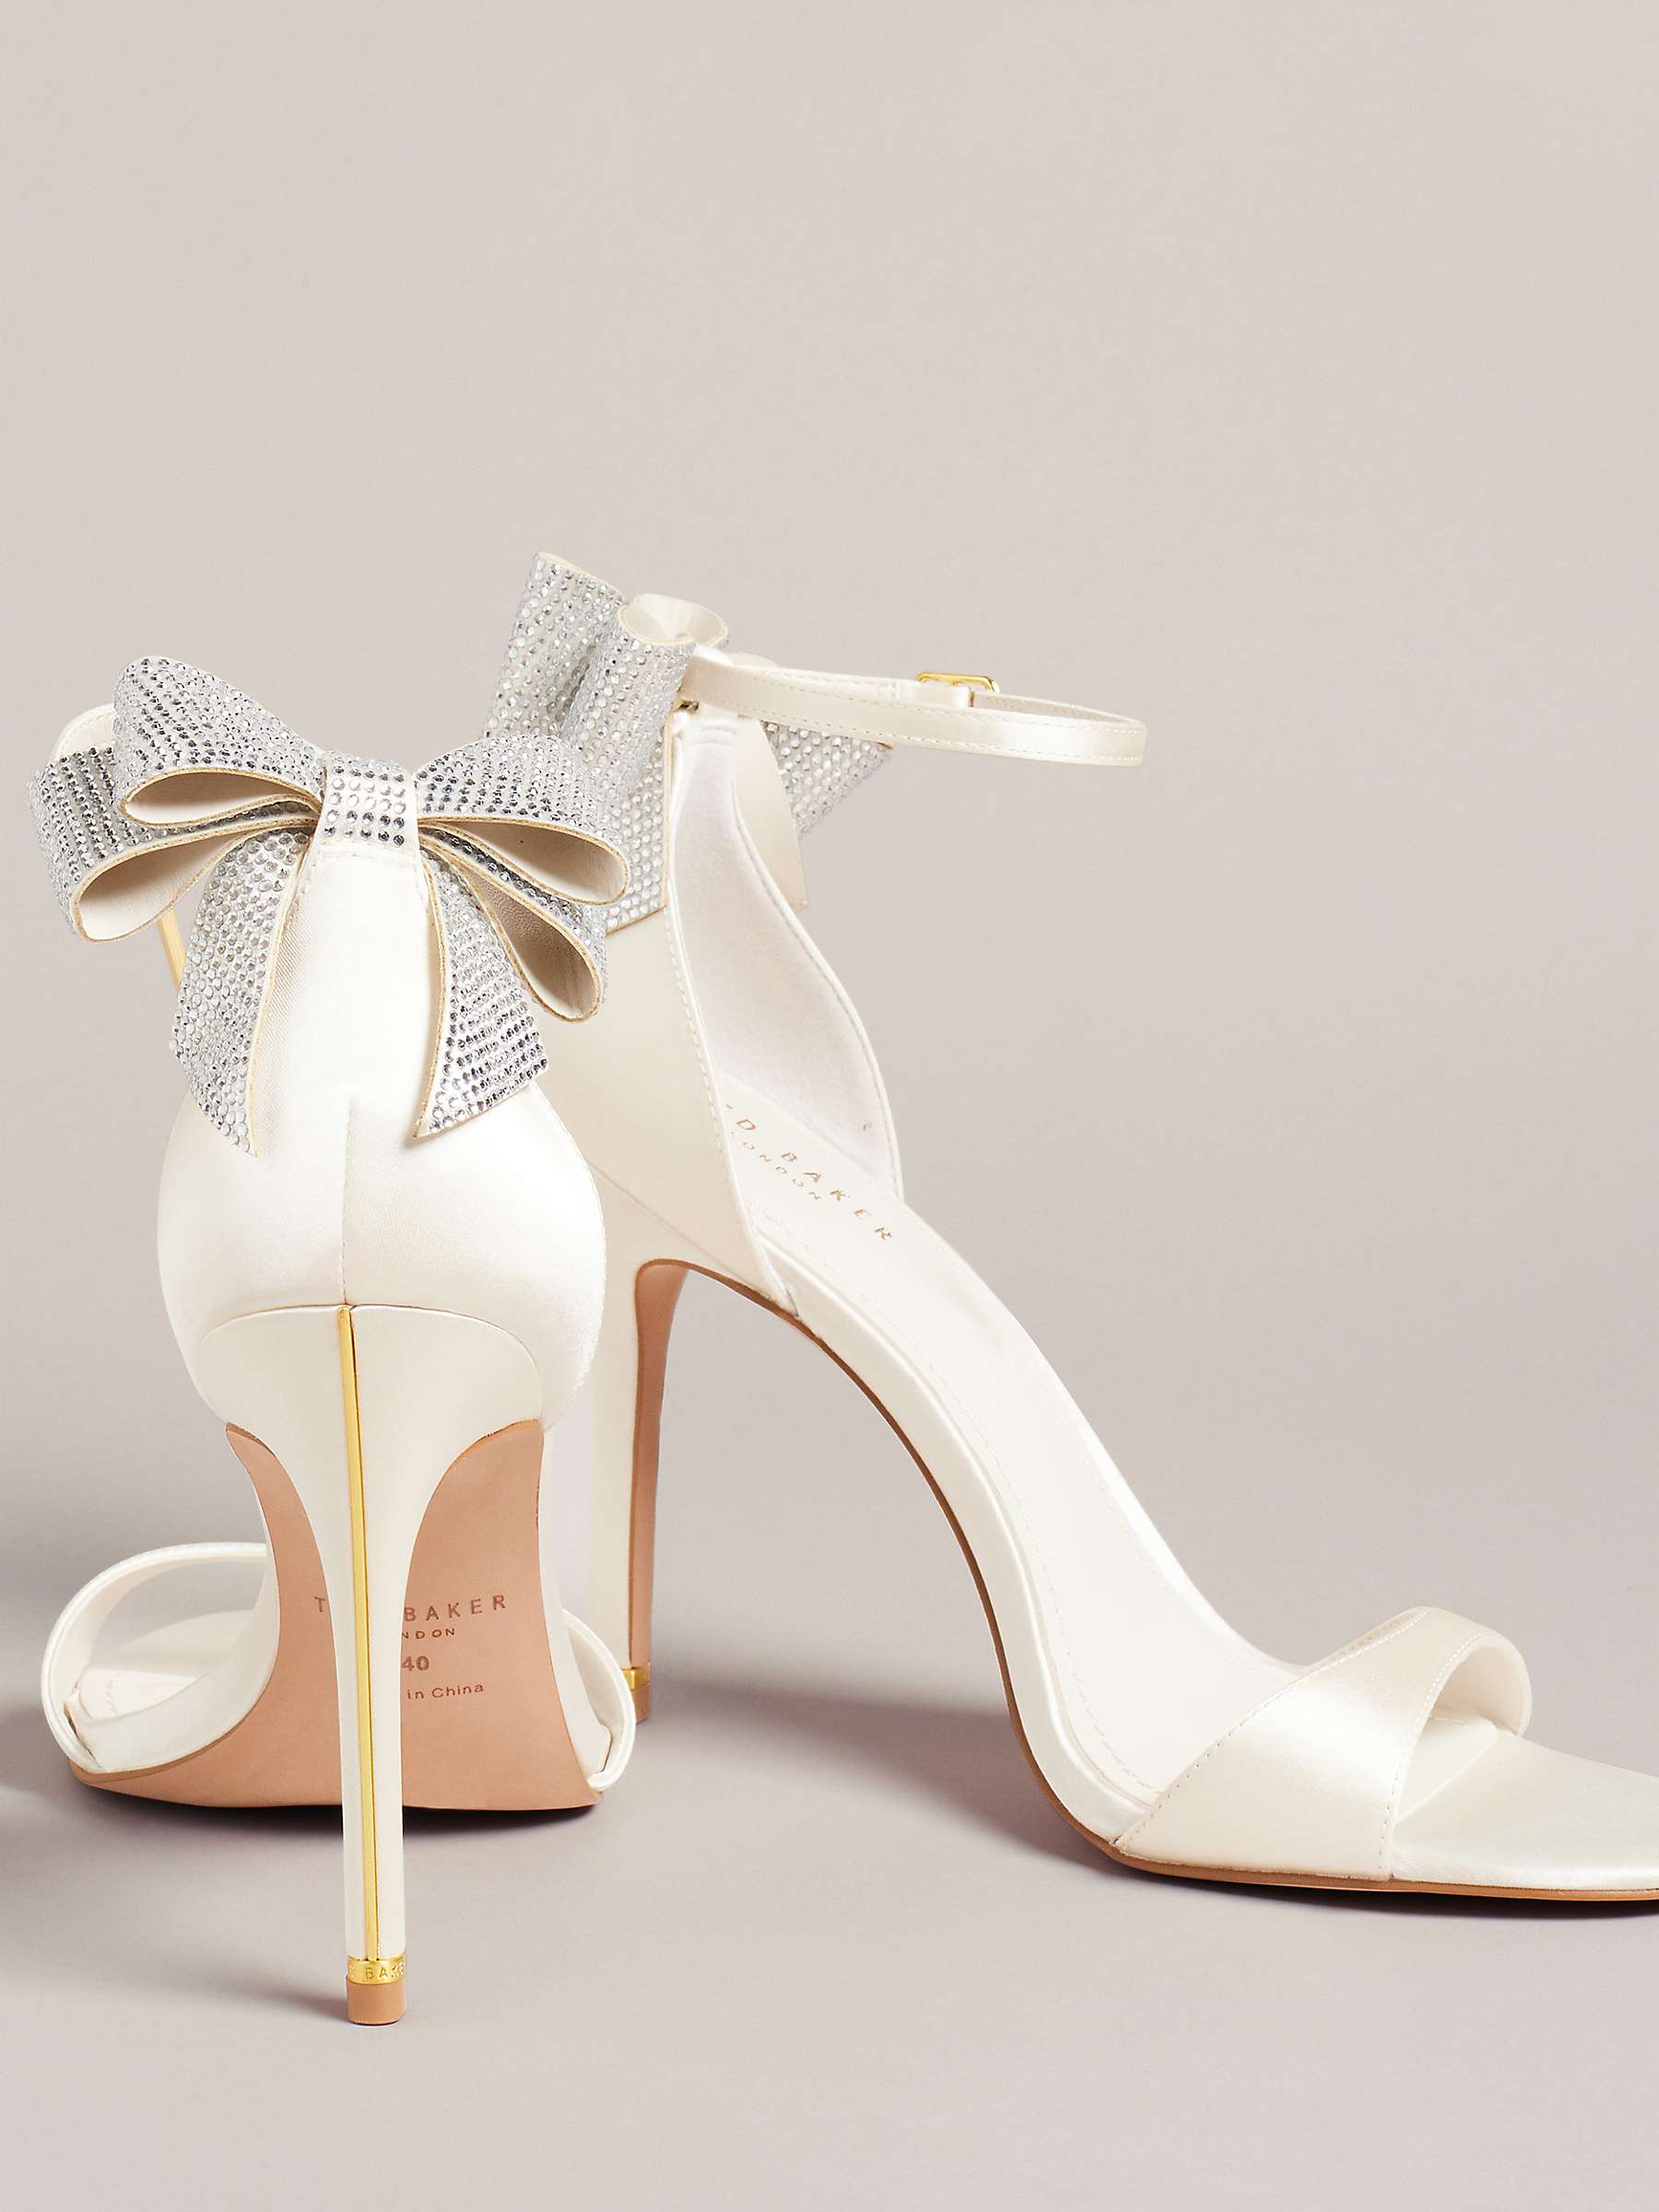 Buy Ted Baker Hemary Satin Crystal Bow Back Sandals, Ivory Online at johnlewis.com